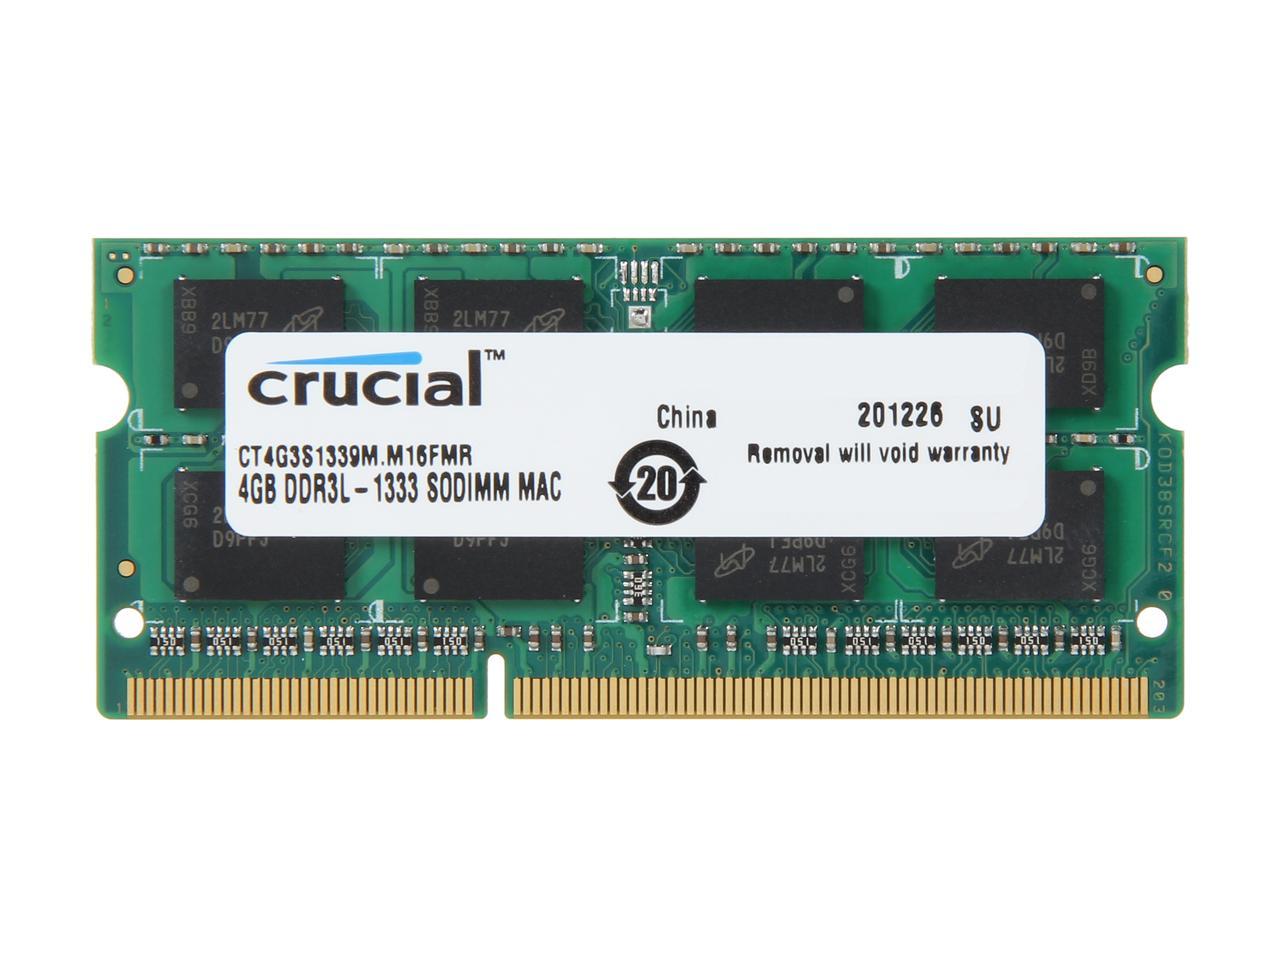 "Crucial 4GB DDR3L-1333 SODIMM Memory for Mac - CT4G3S1339M" - image 1 of 3